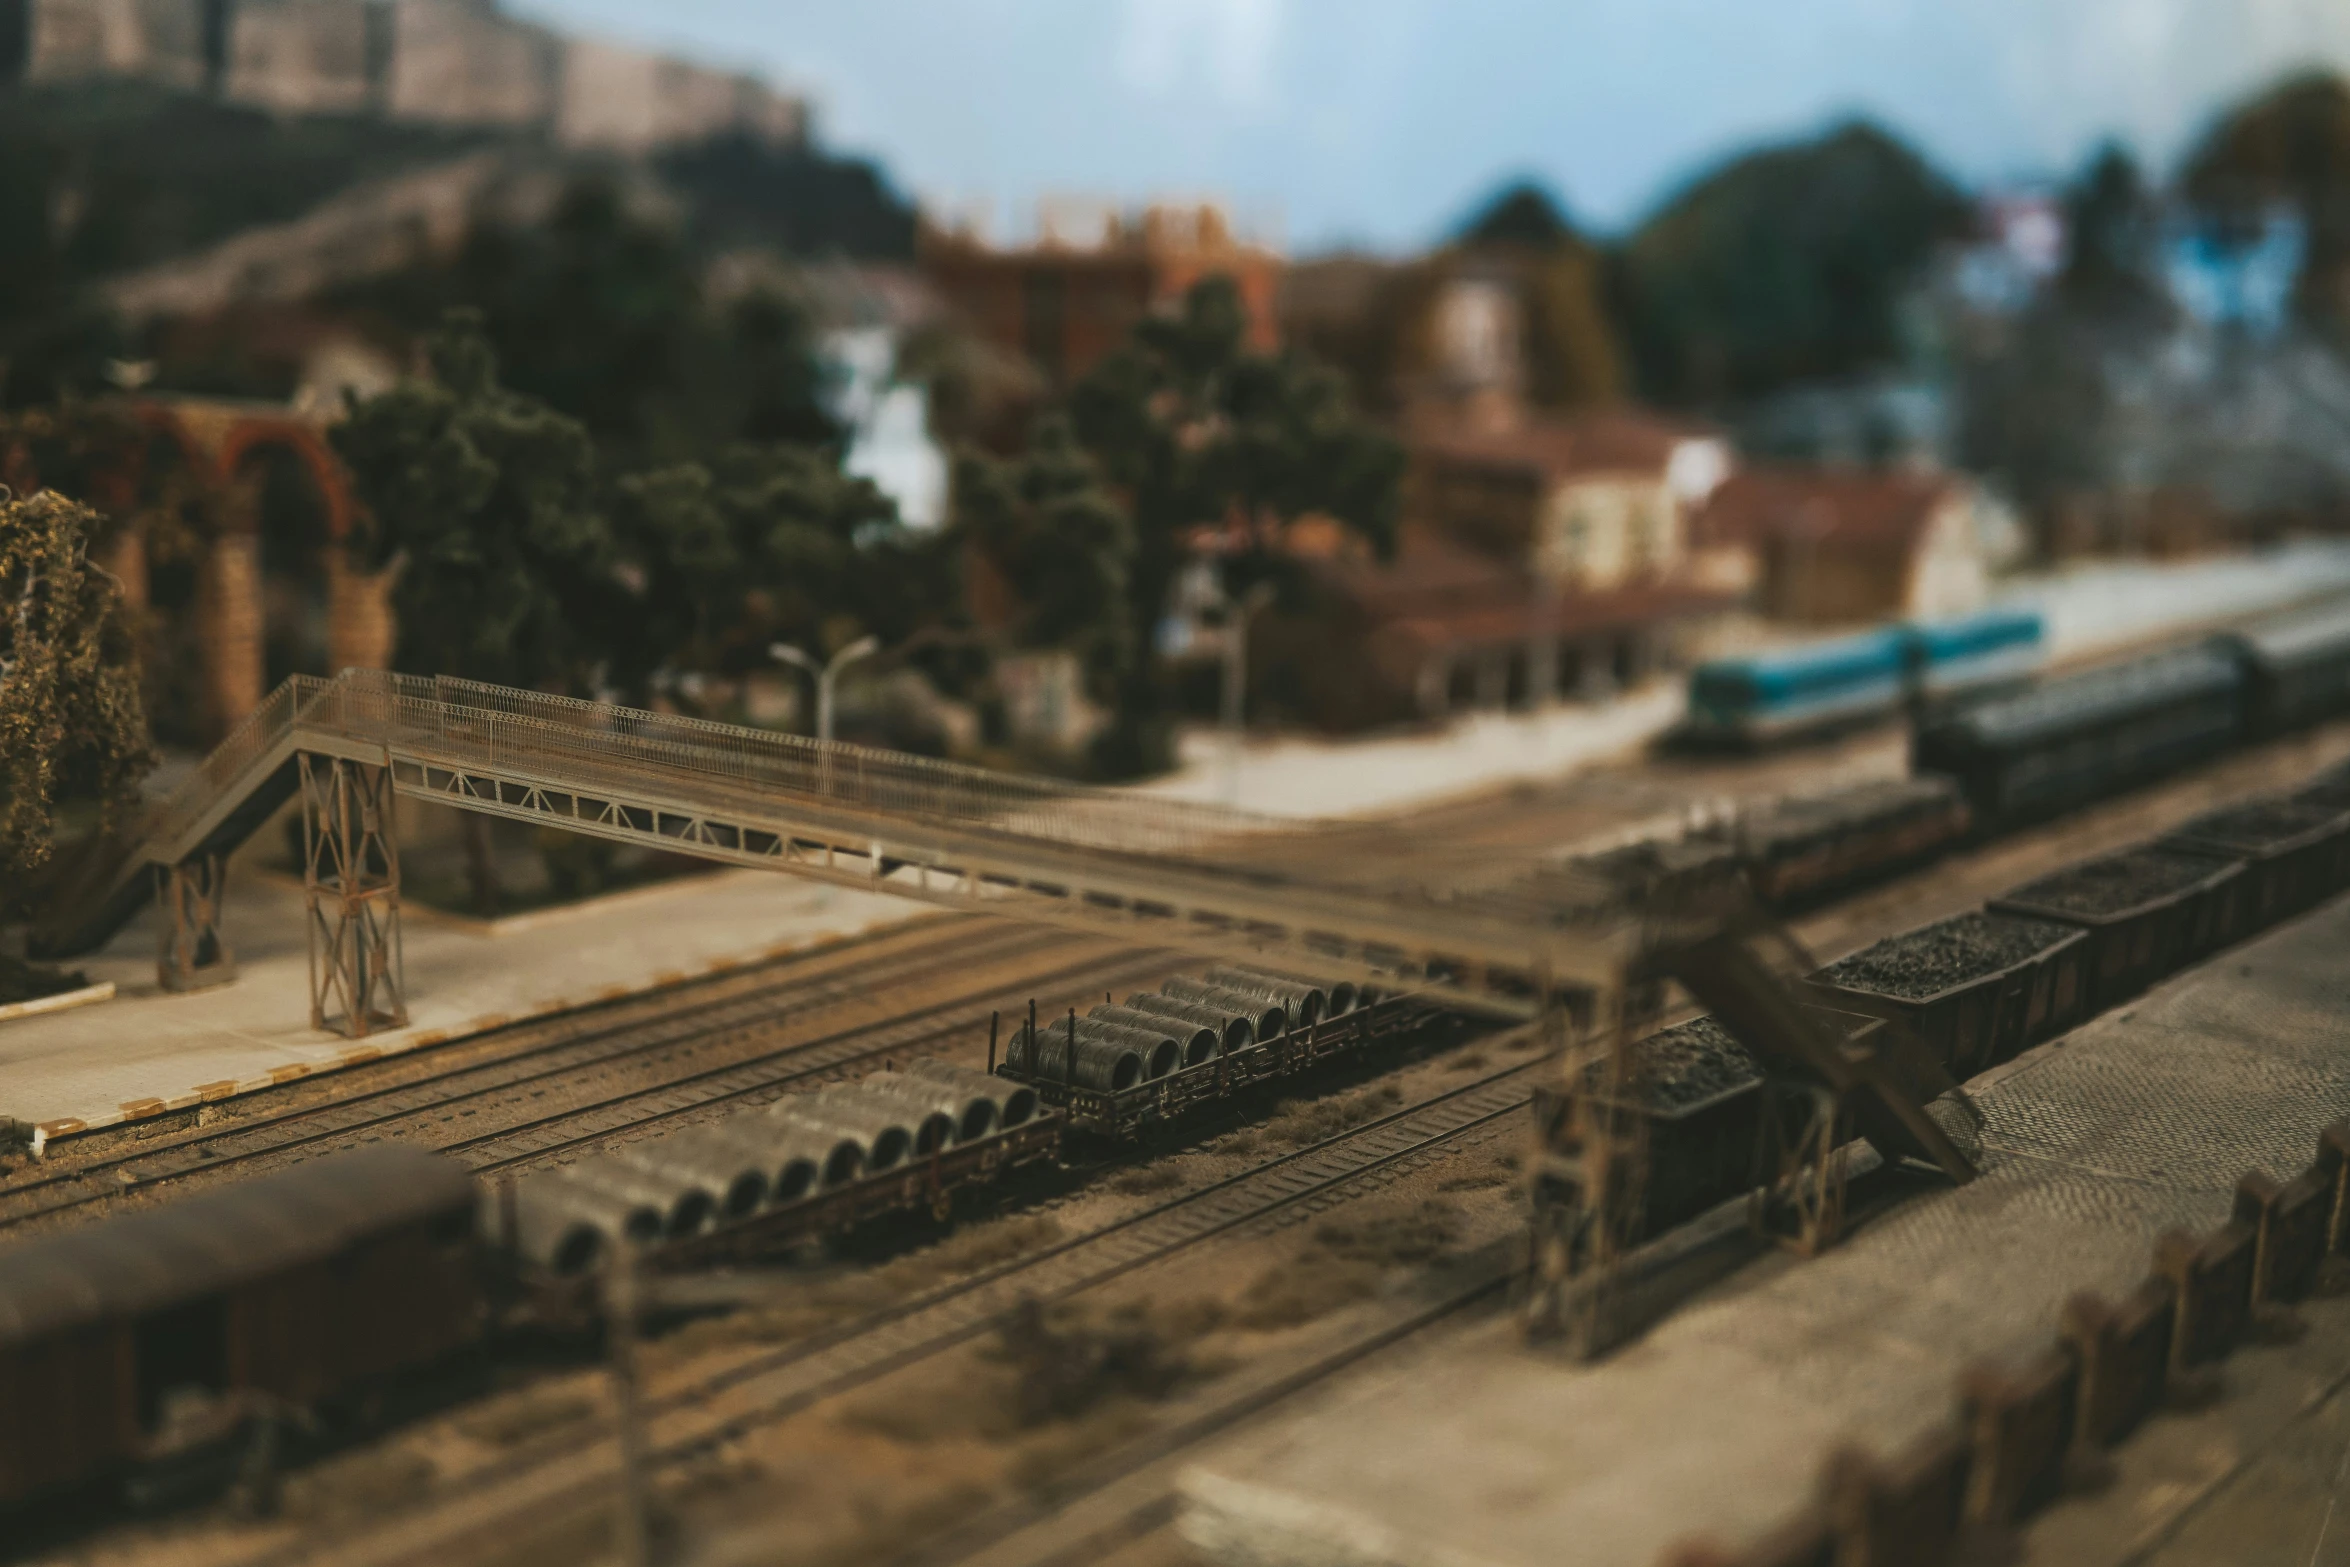 the top portion of a model train track with a train traveling through the tracks